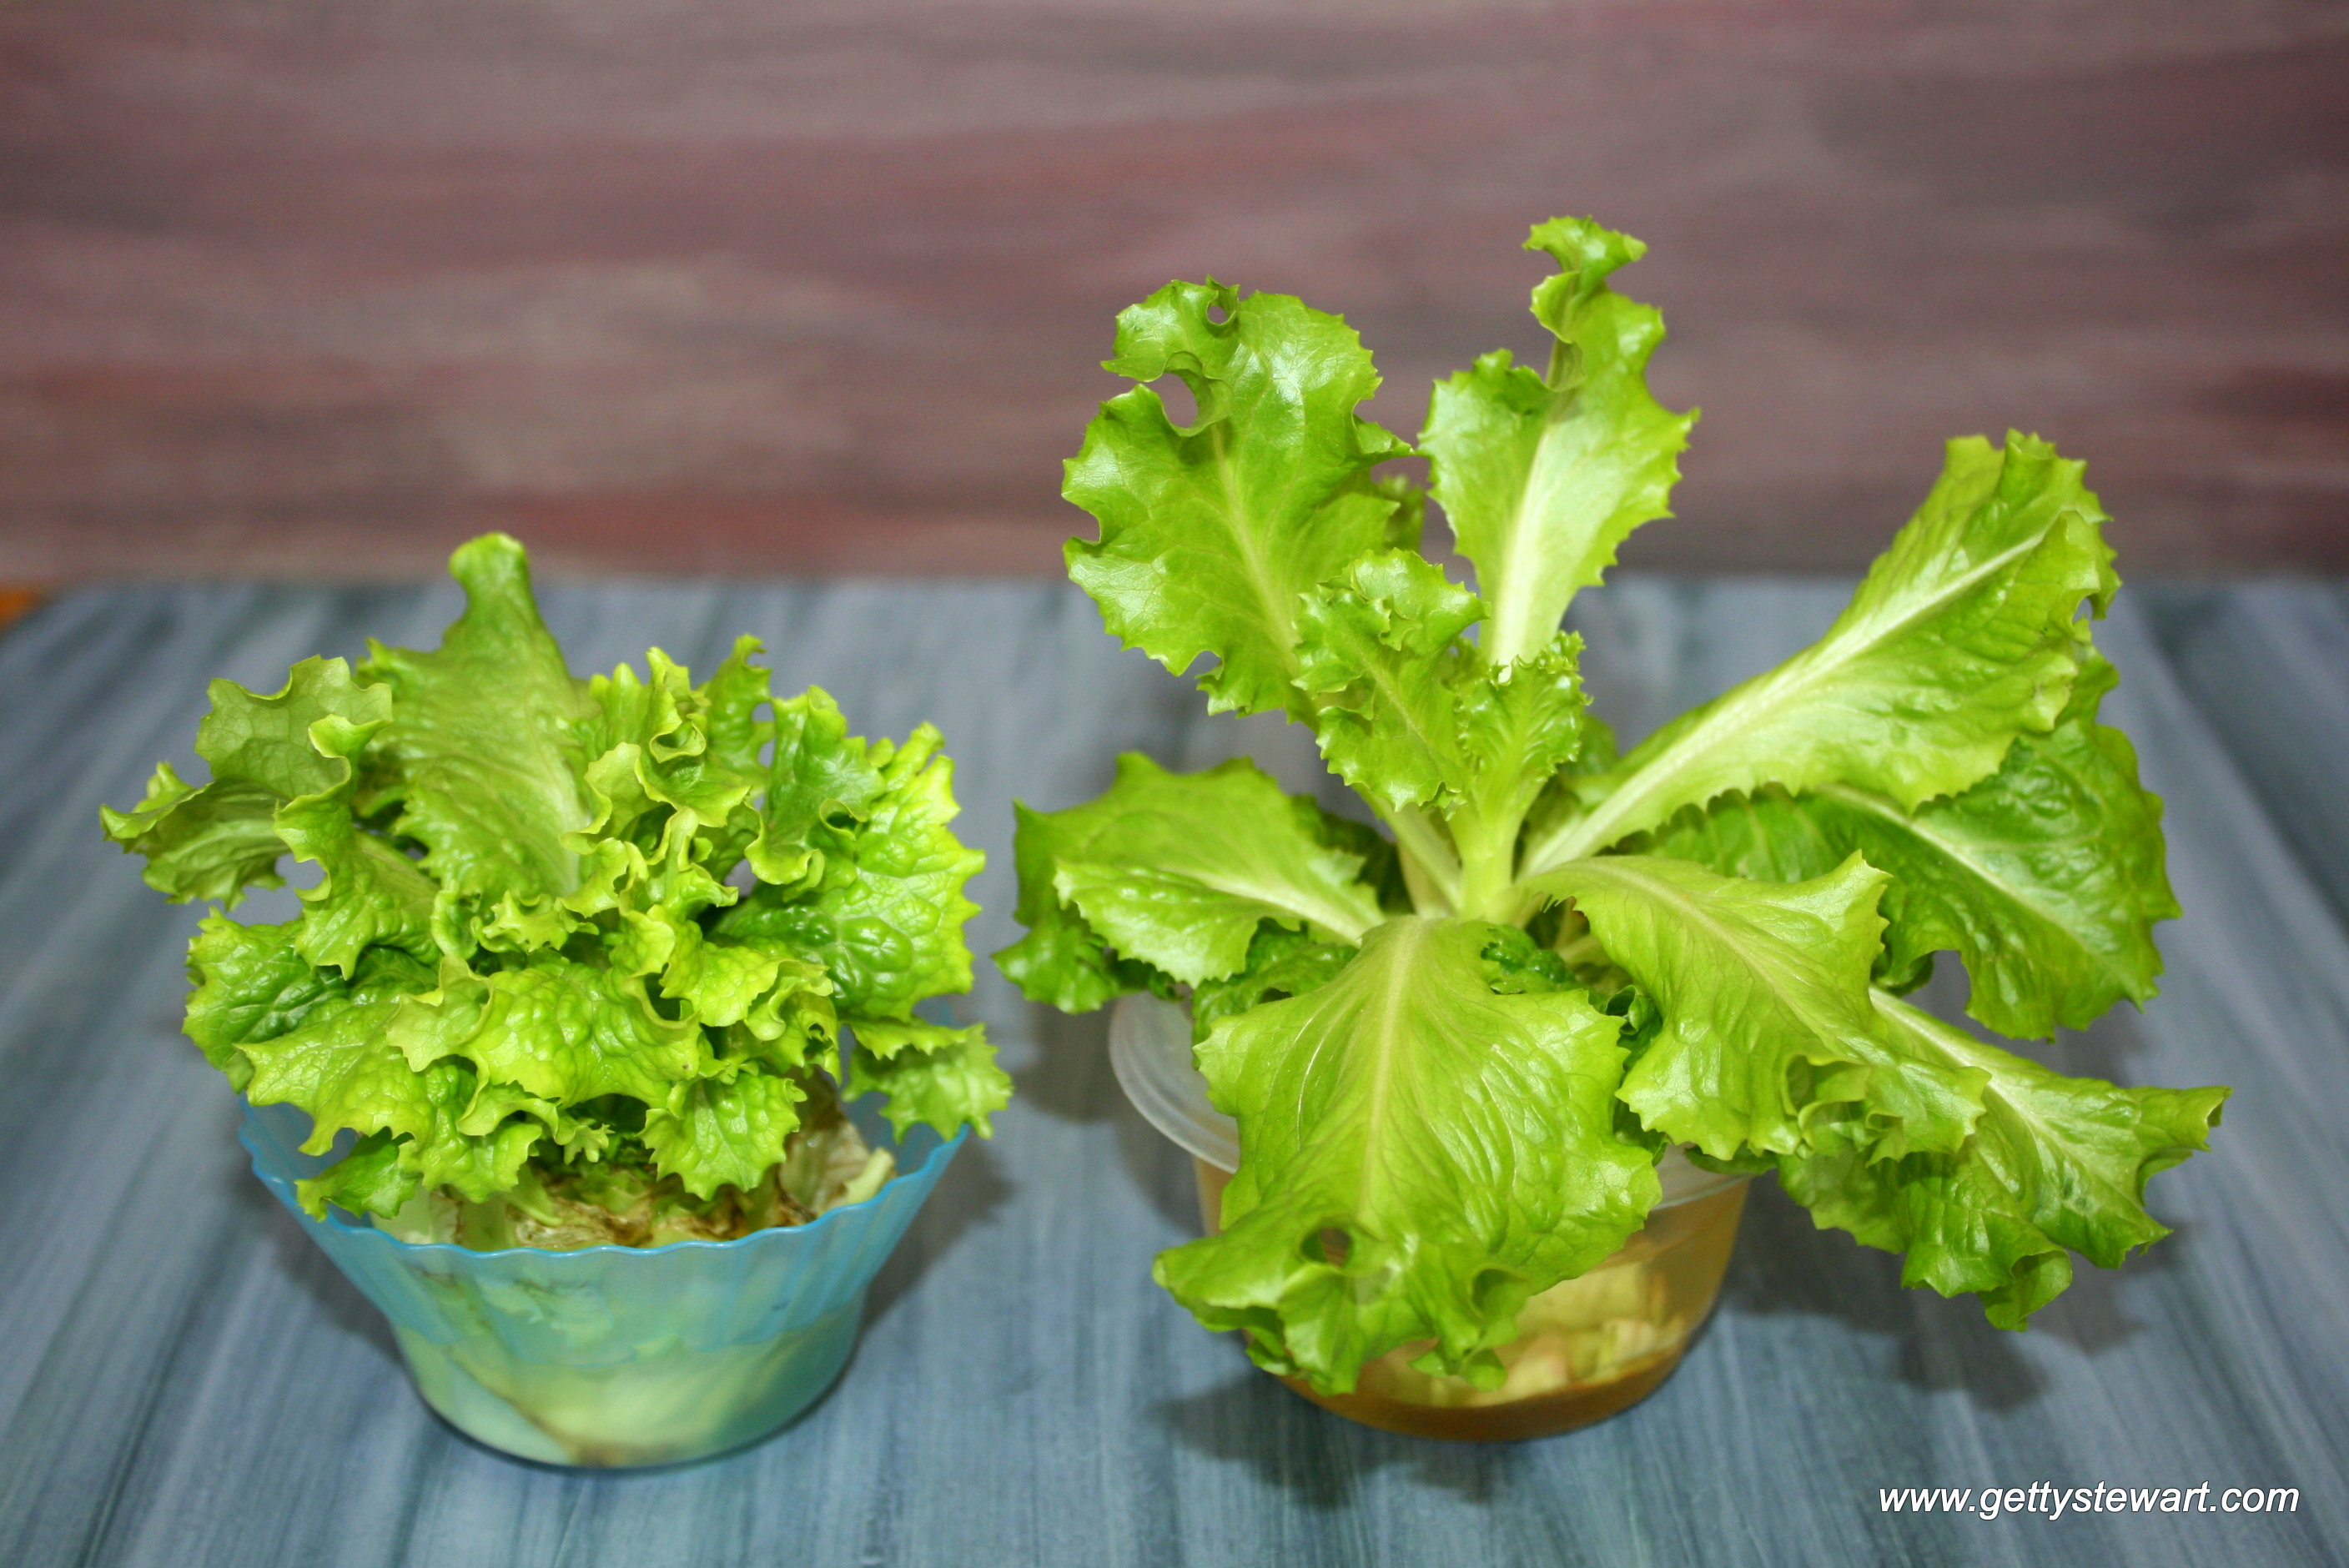 How to Regrow Romaine Lettuce from the Stem - GettyStewart.com